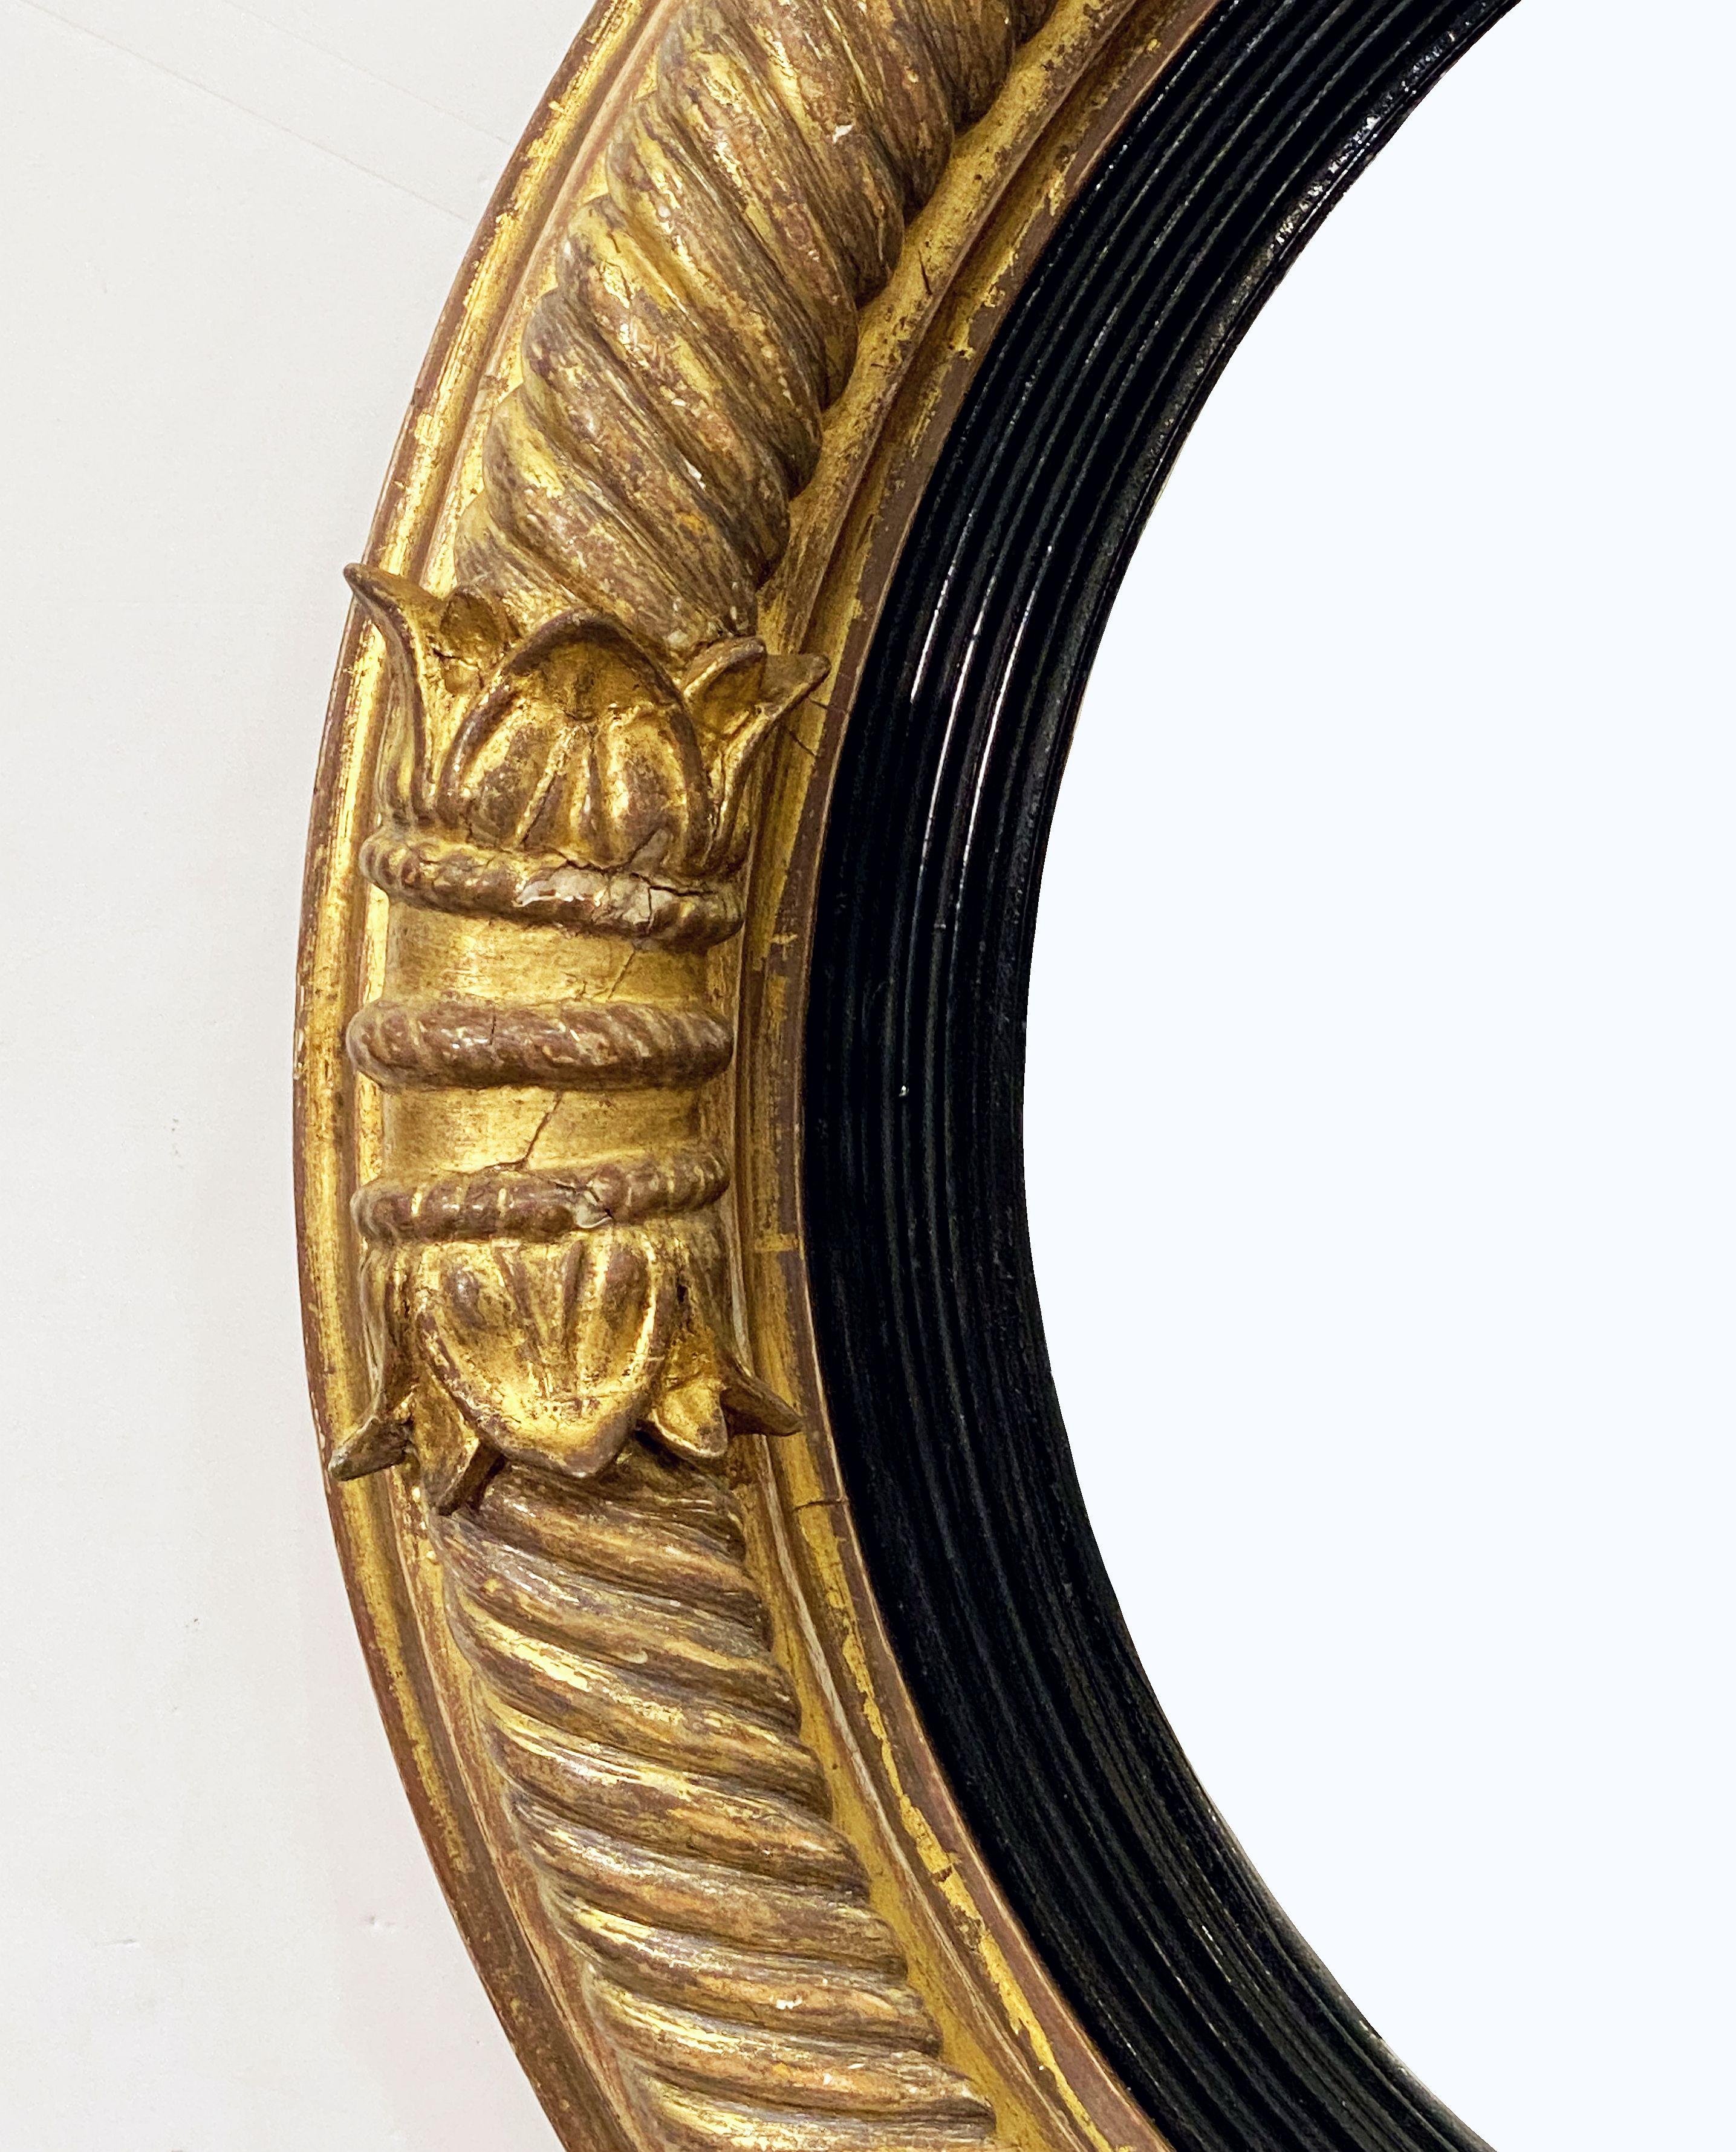 English Gilt and Ebony Convex Mirror from the Regency Era (Diameter 21 1/4) For Sale 1